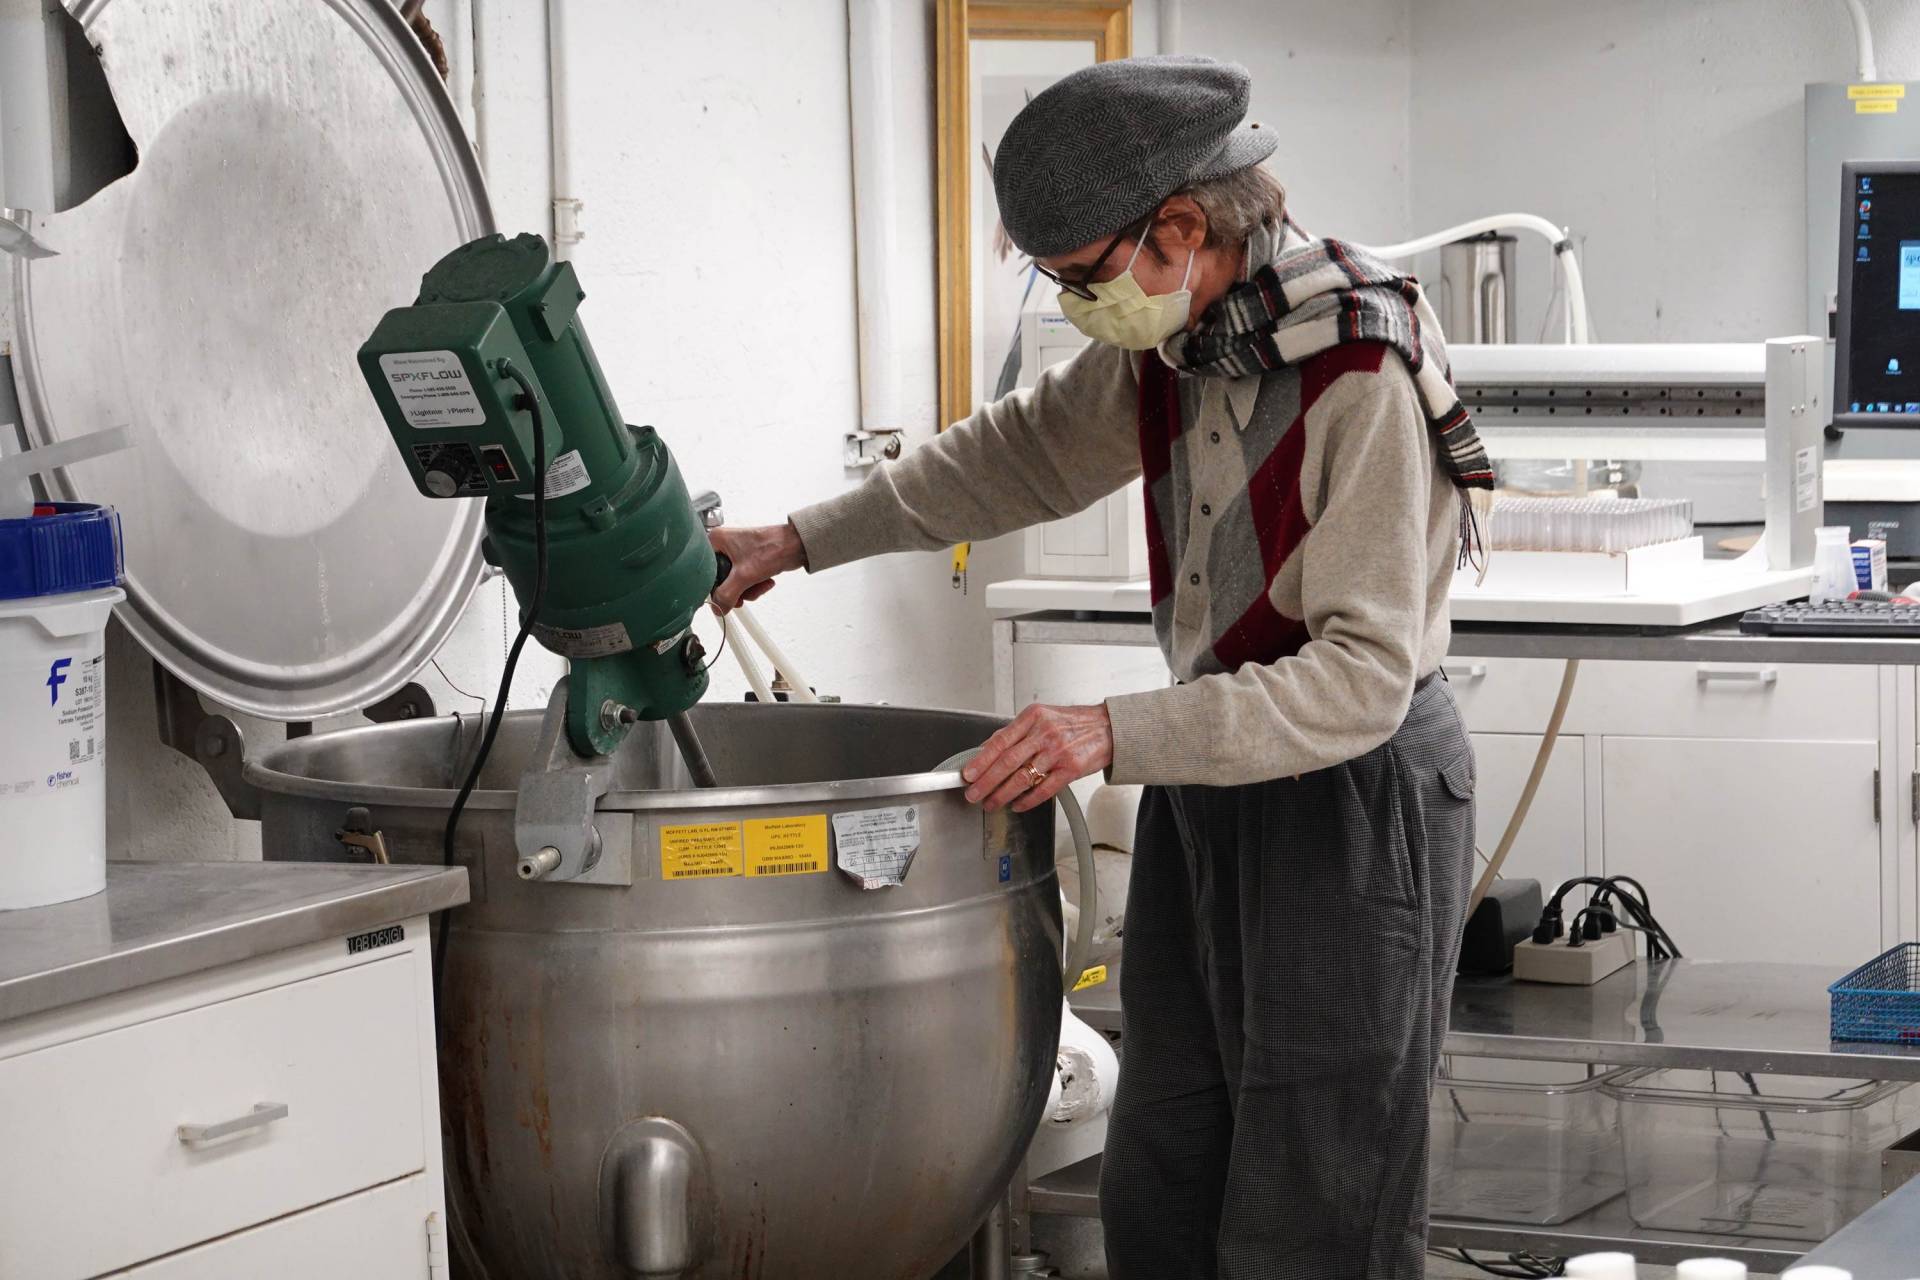 Essential work: Princeton’s fly food chef provides sustenance for life-sciences research